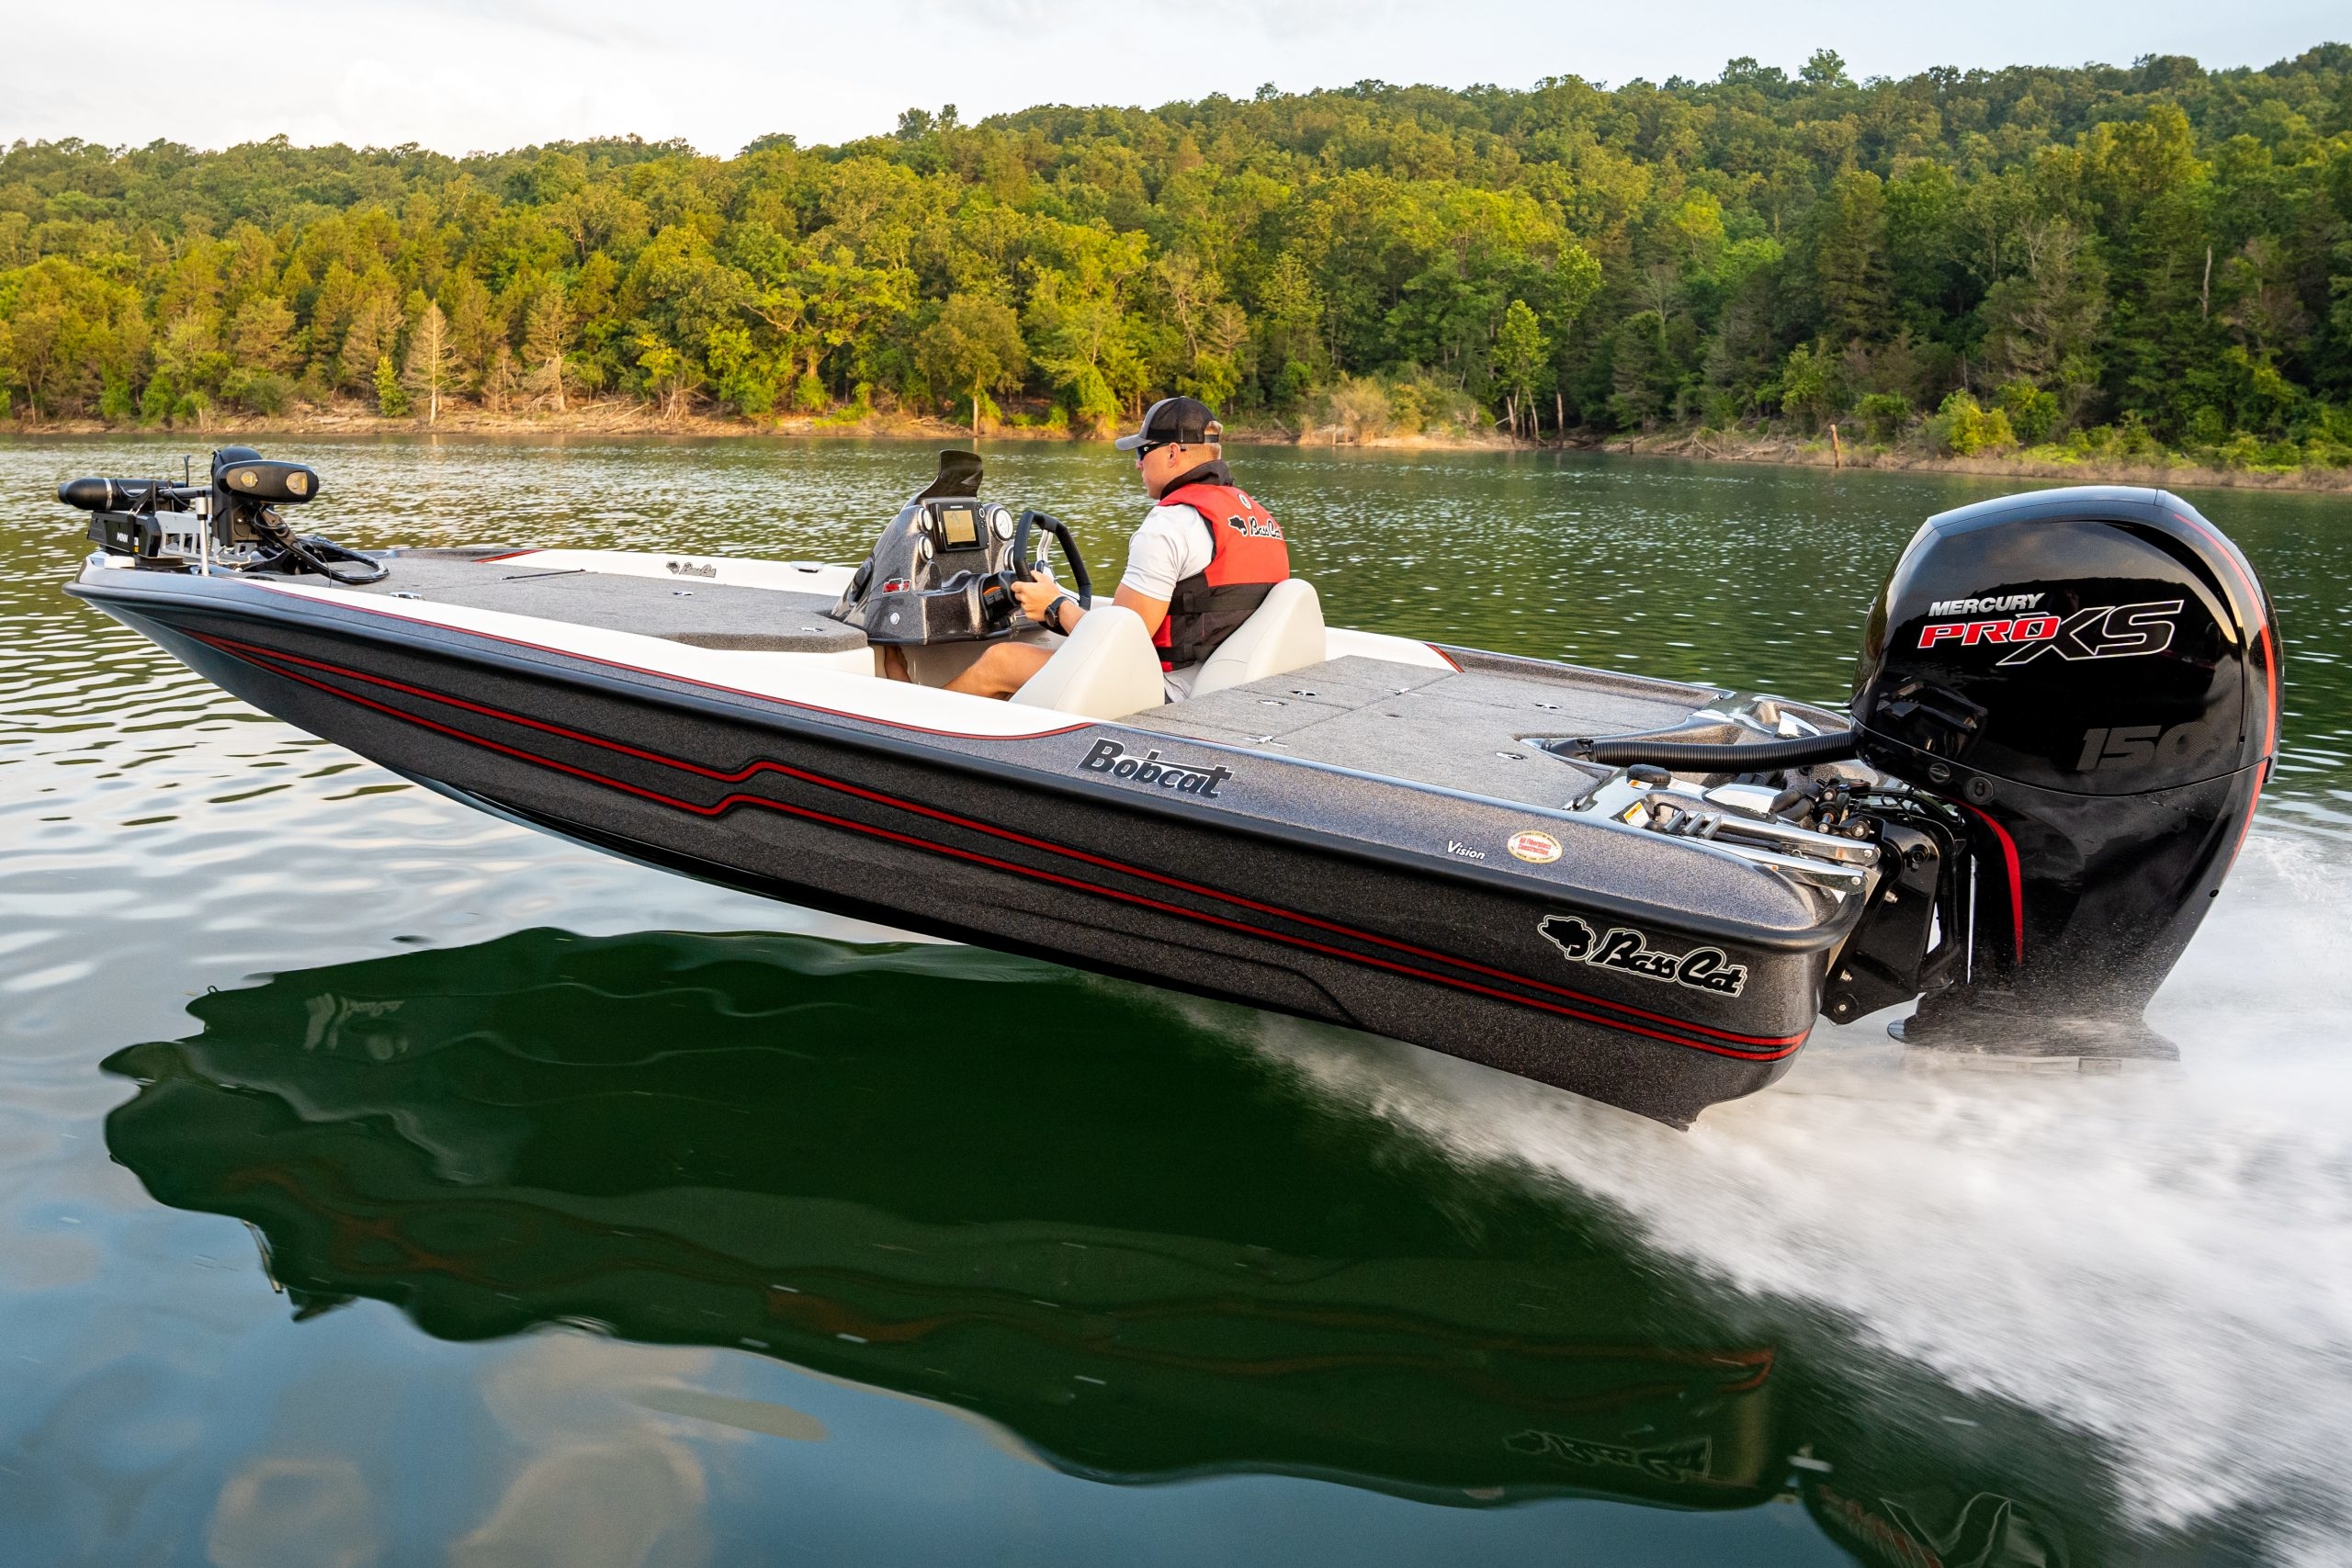 Bass Cat Bobcat Prices, Specs, Reviews and Sales Information itBoat